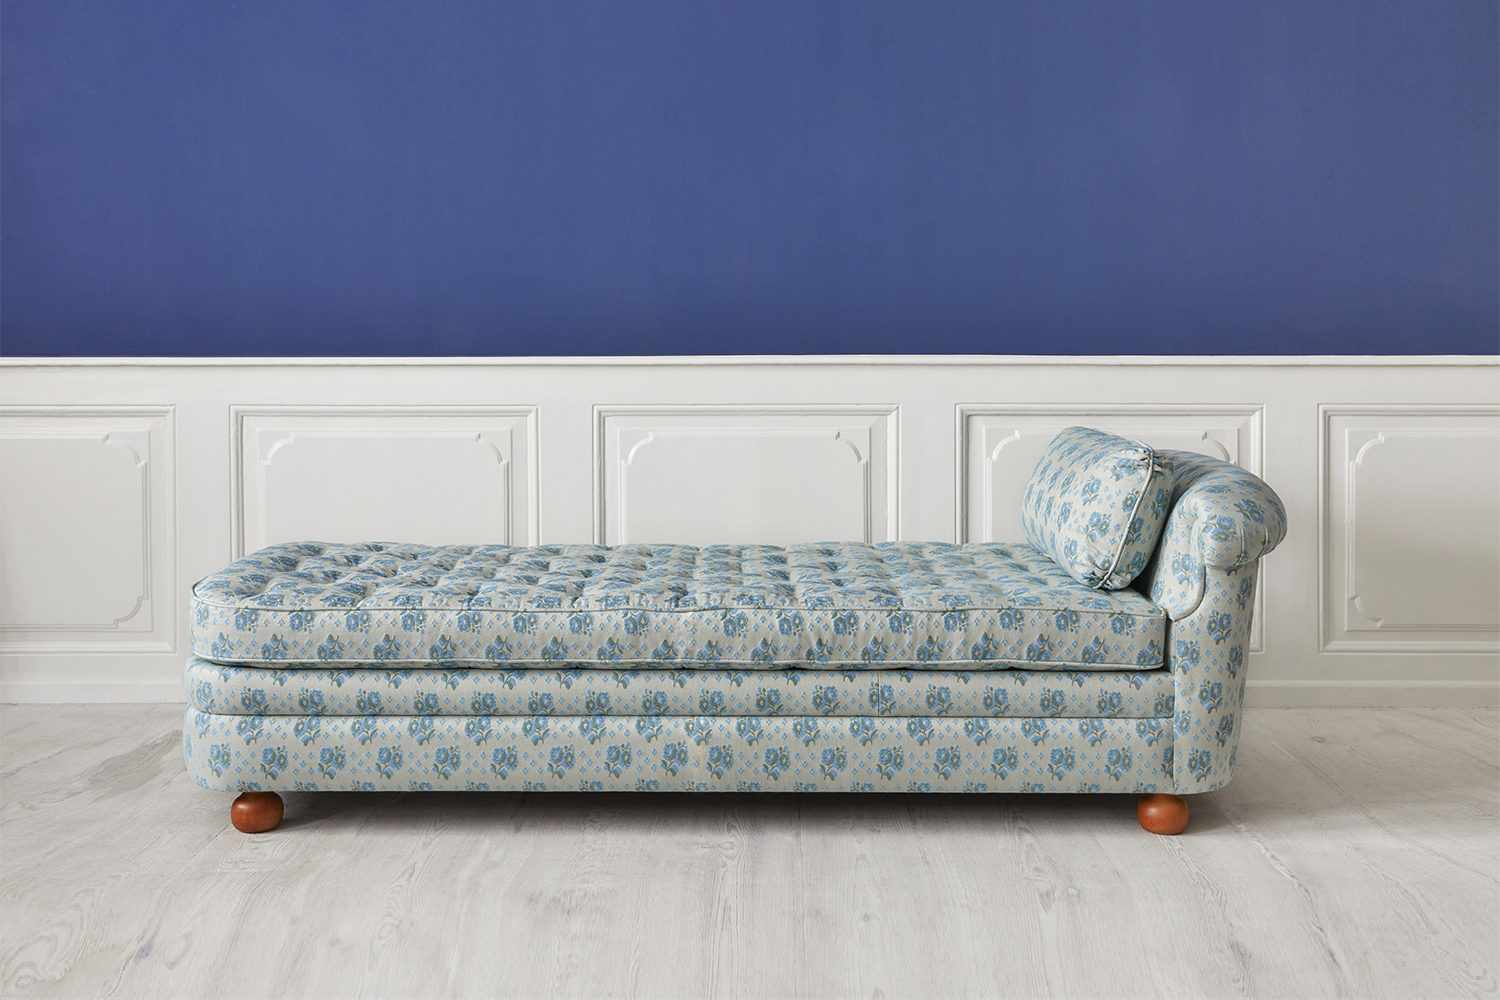 a similar daybed is the svenskt tenn daybed designed by josef frank in 1938, a 15